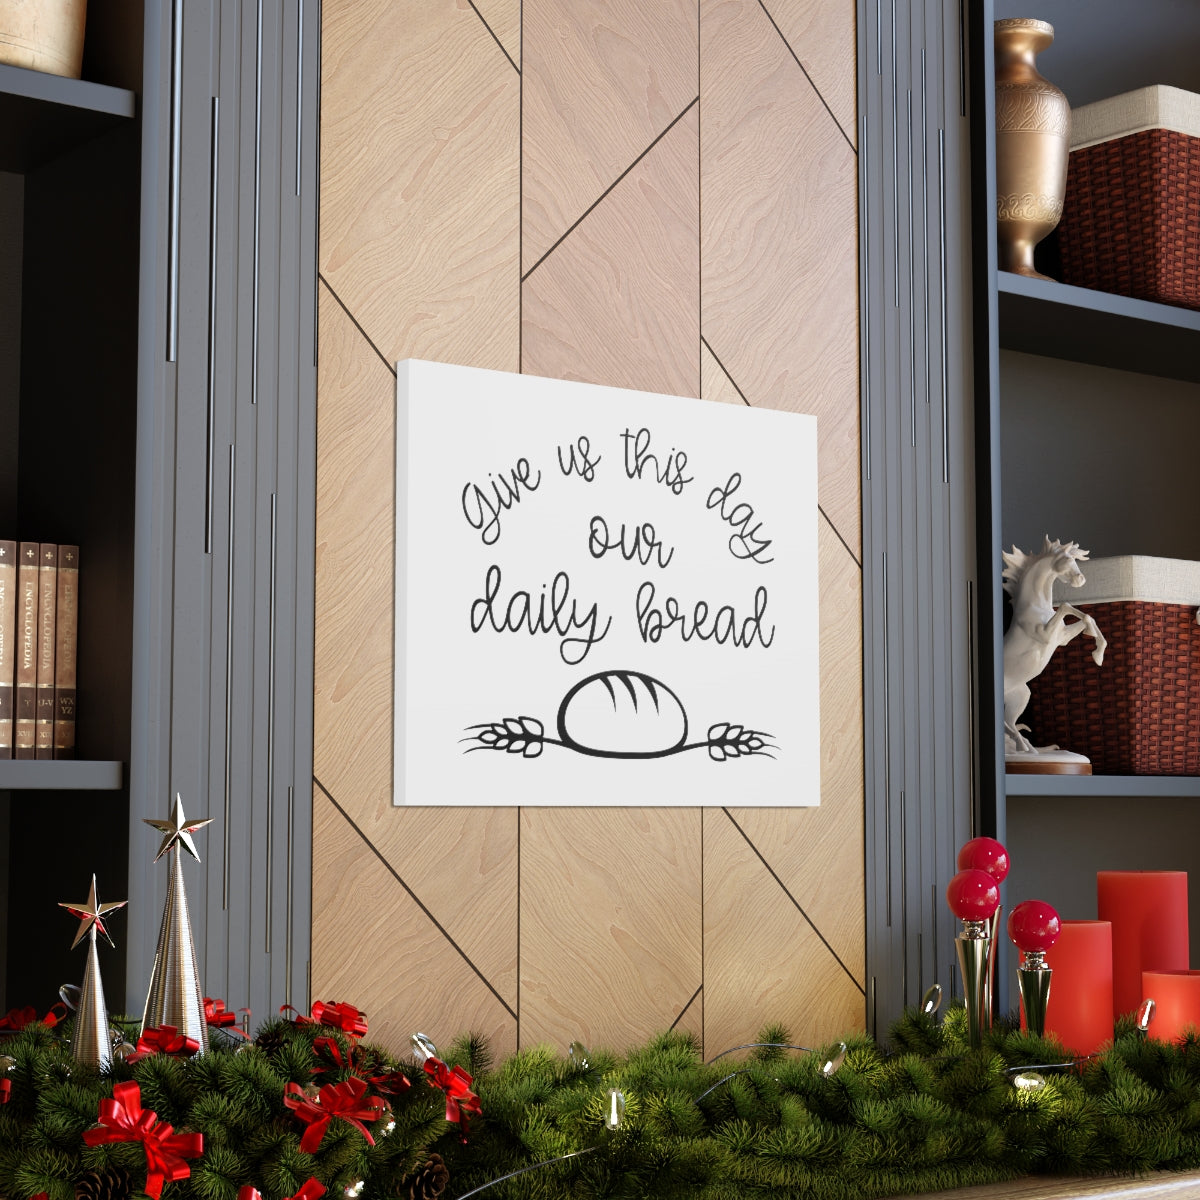 Scripture Walls Our Daily Bread Matthew 6:11 Christian Wall Art Print Ready to Hang Unframed-Express Your Love Gifts